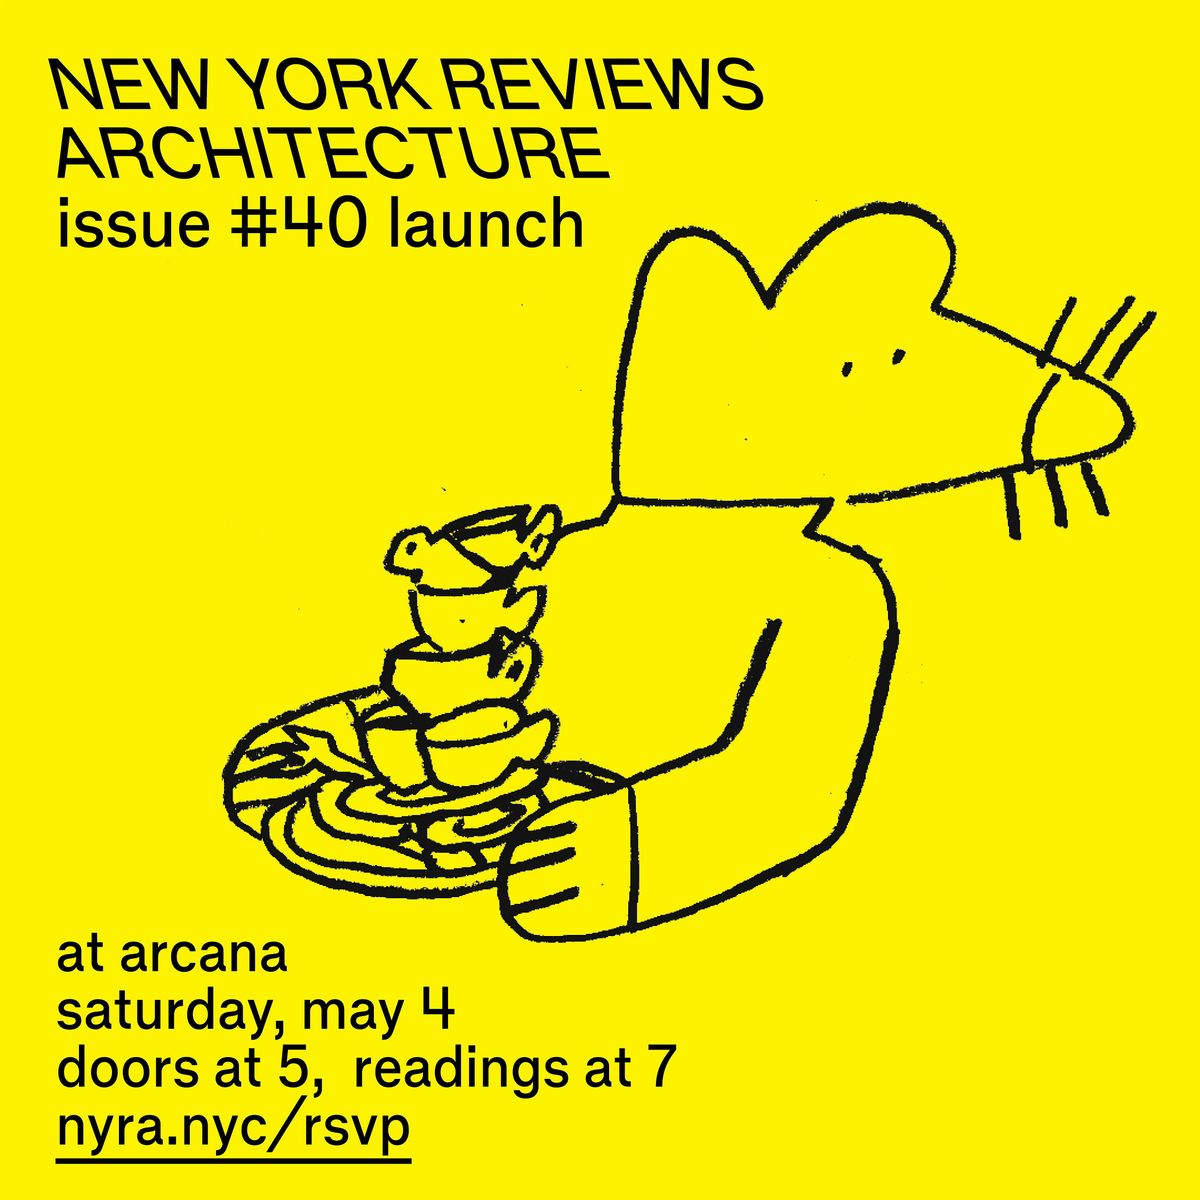 New York Reviews Architecture: Issue #40 Launch Party